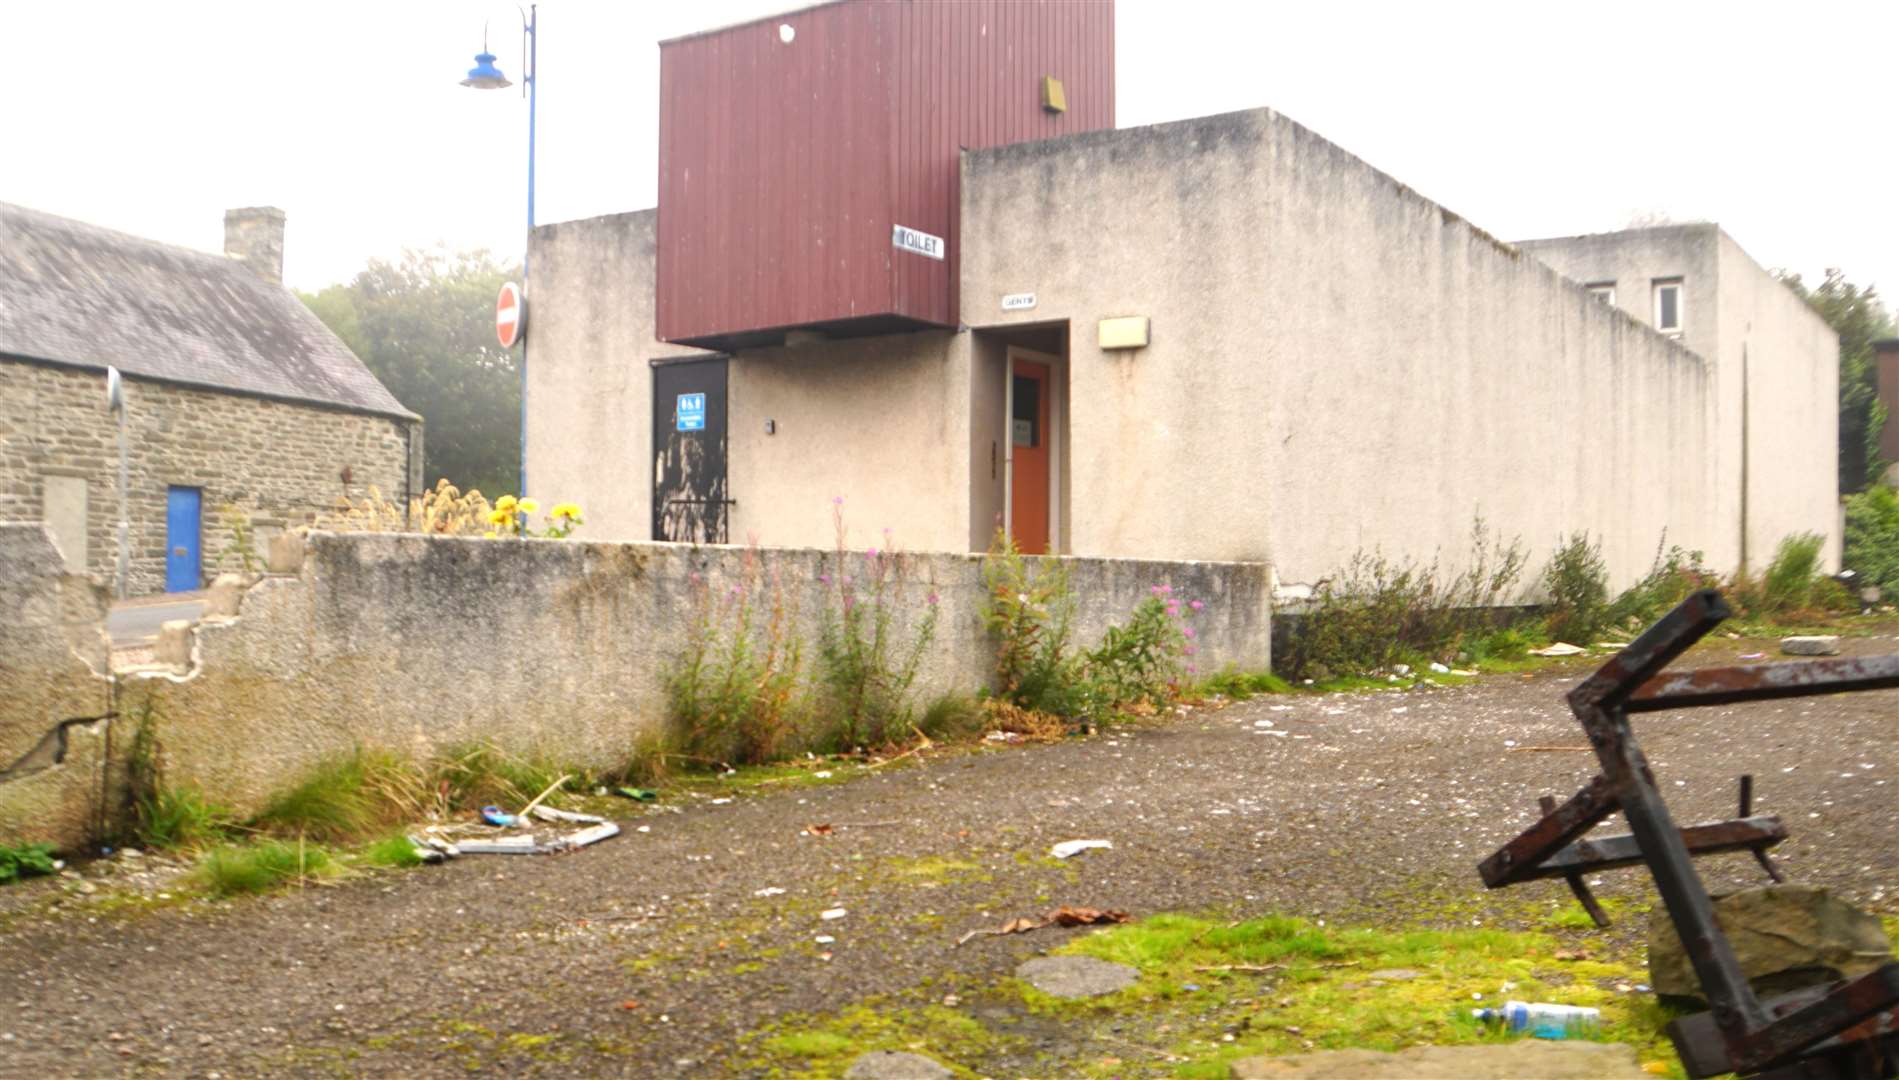 The public toilets are in an area of Wick that has been blighted by vandalism over the past few months. Picture: DGS